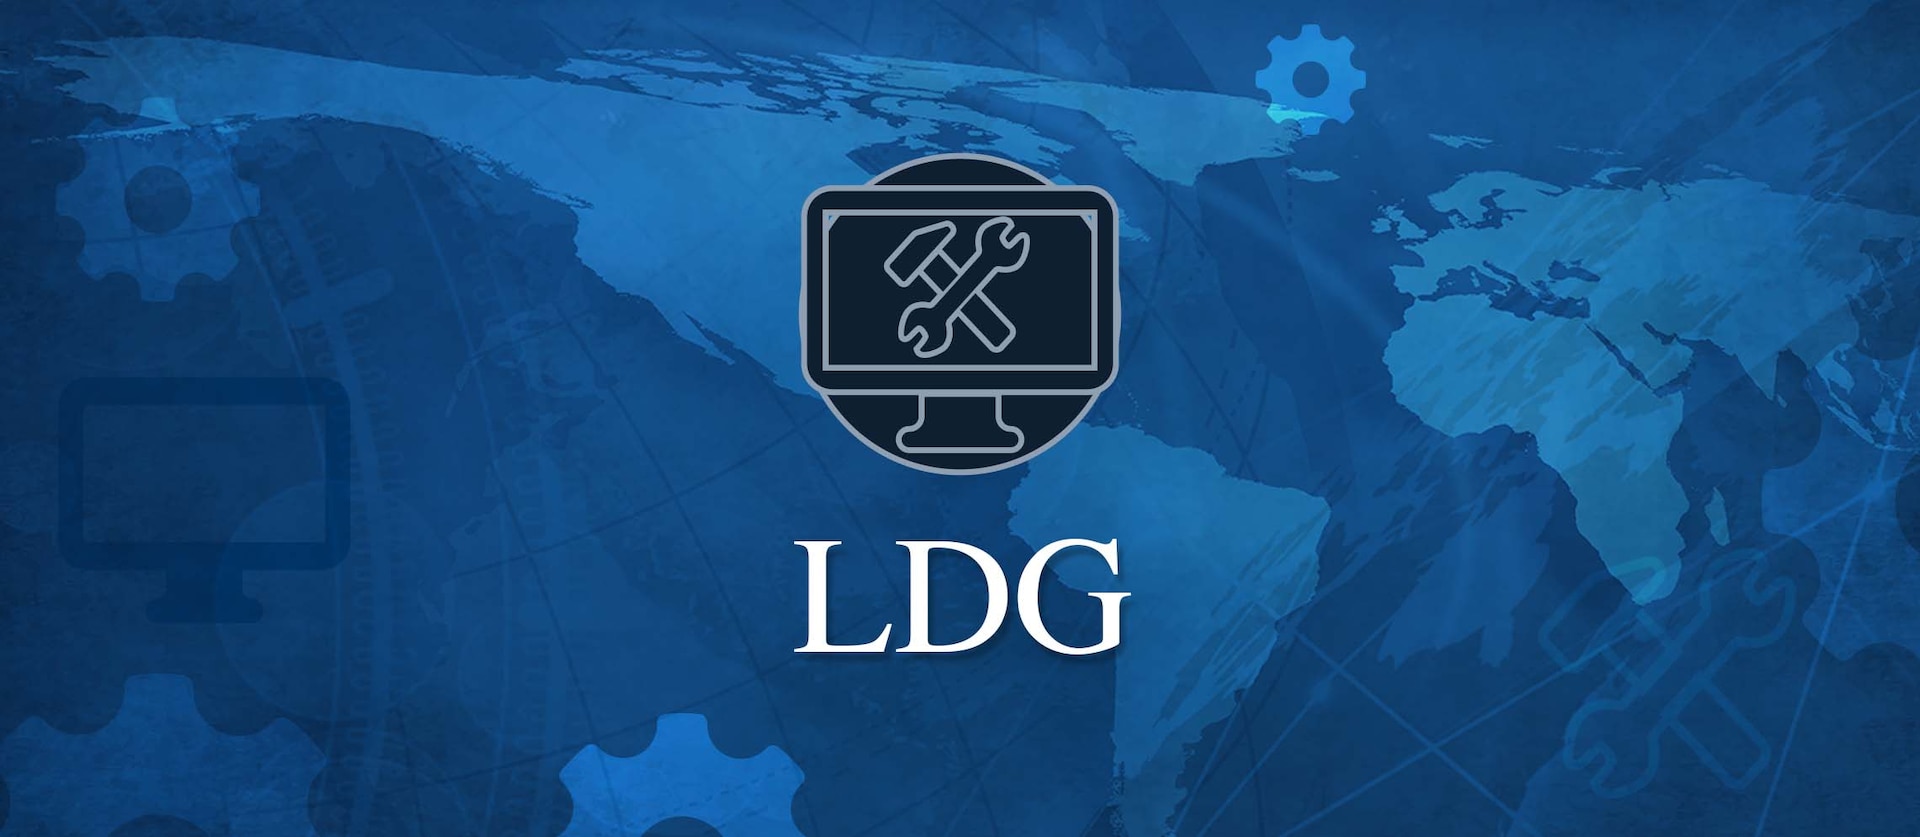 Application graphic for LDG